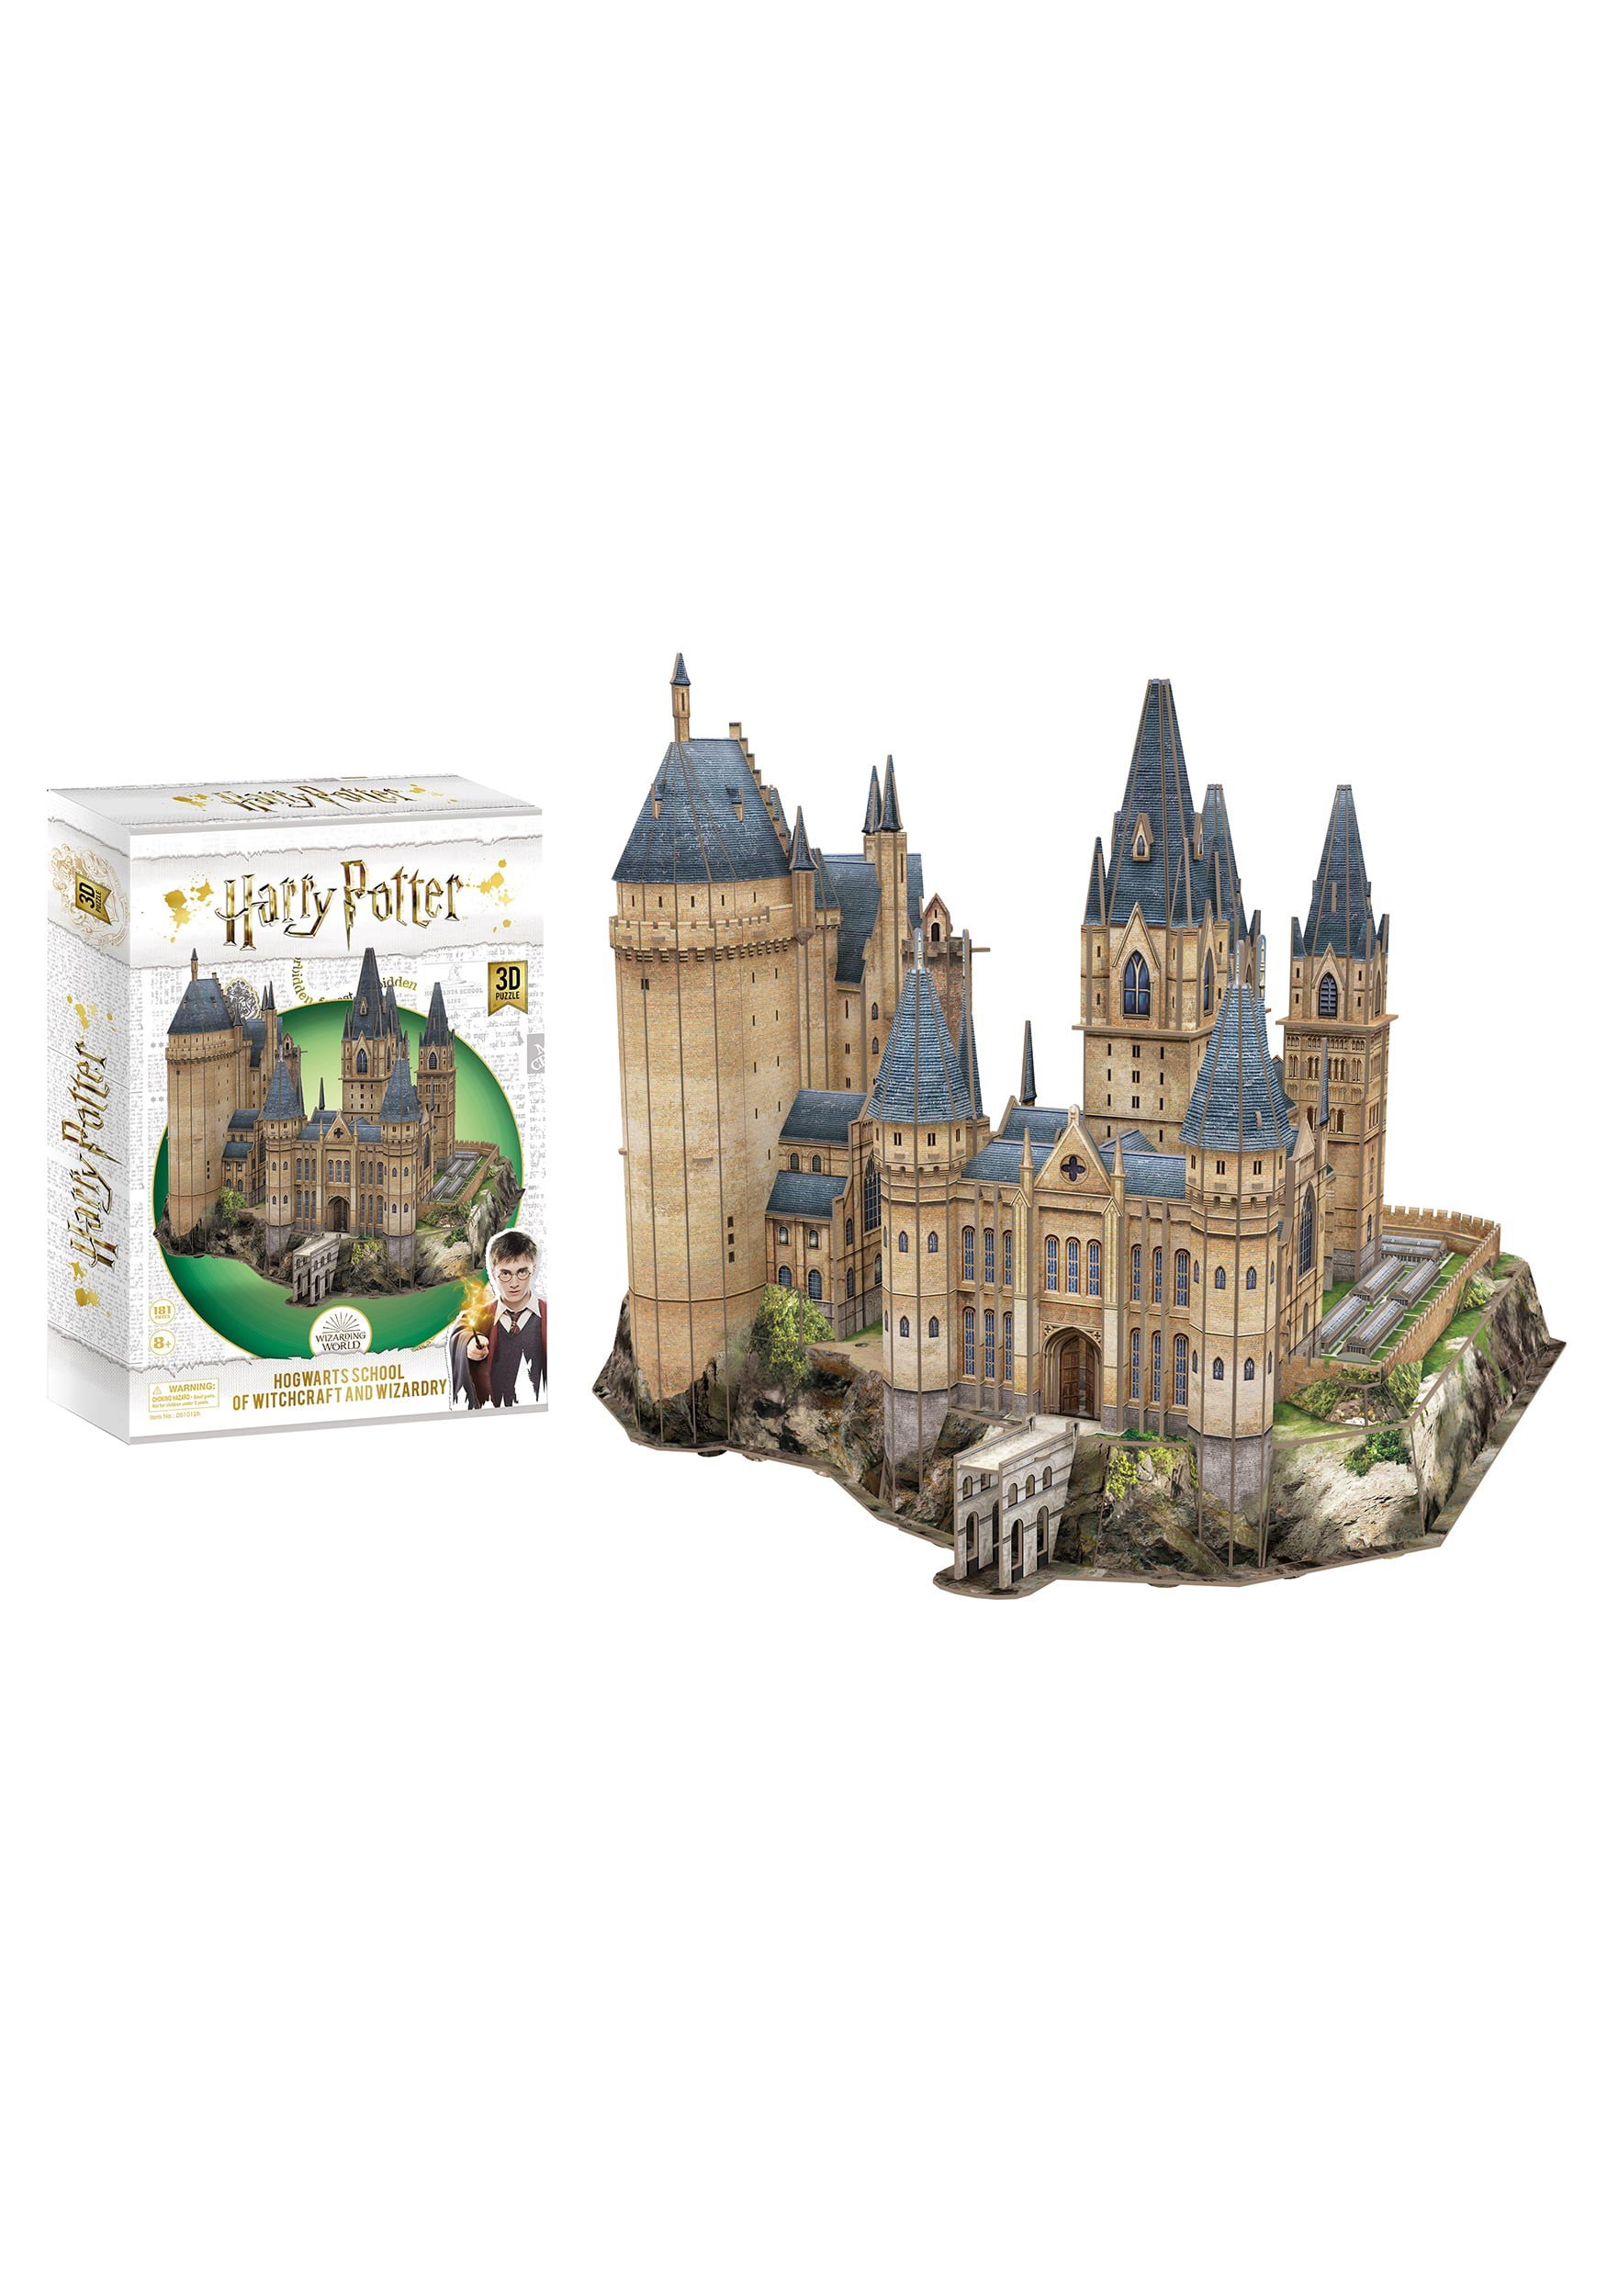 New Hogwarts Castle Wizarding World of Harry Potter 3D Puzzle 428 Pcs Great Gift 